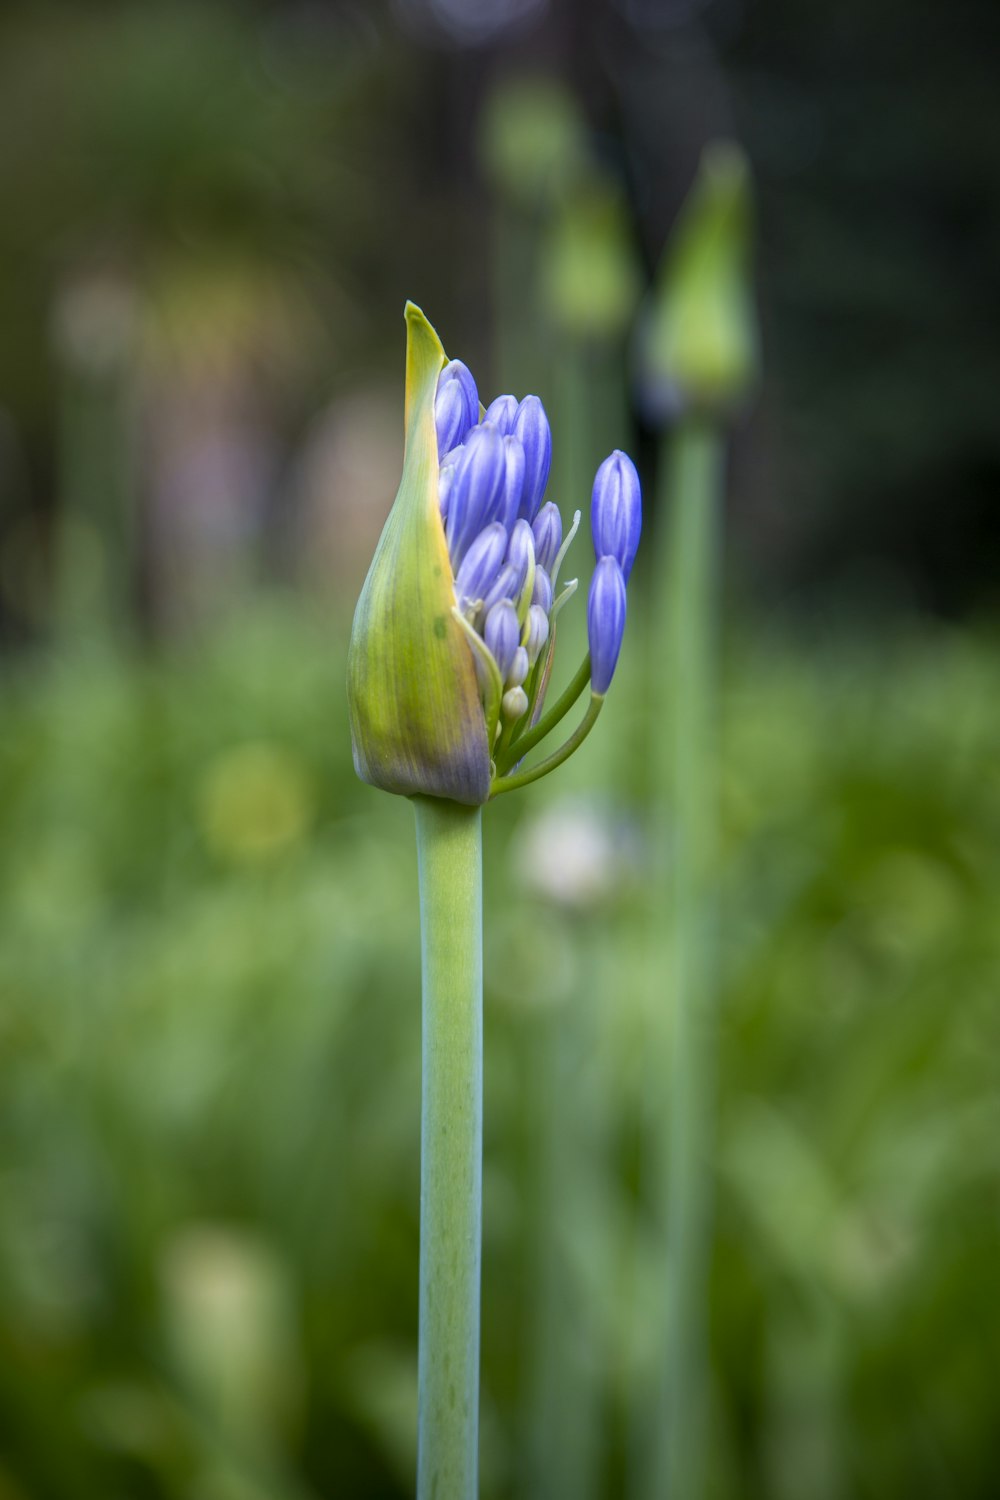 a close up of a blue flower with green stems